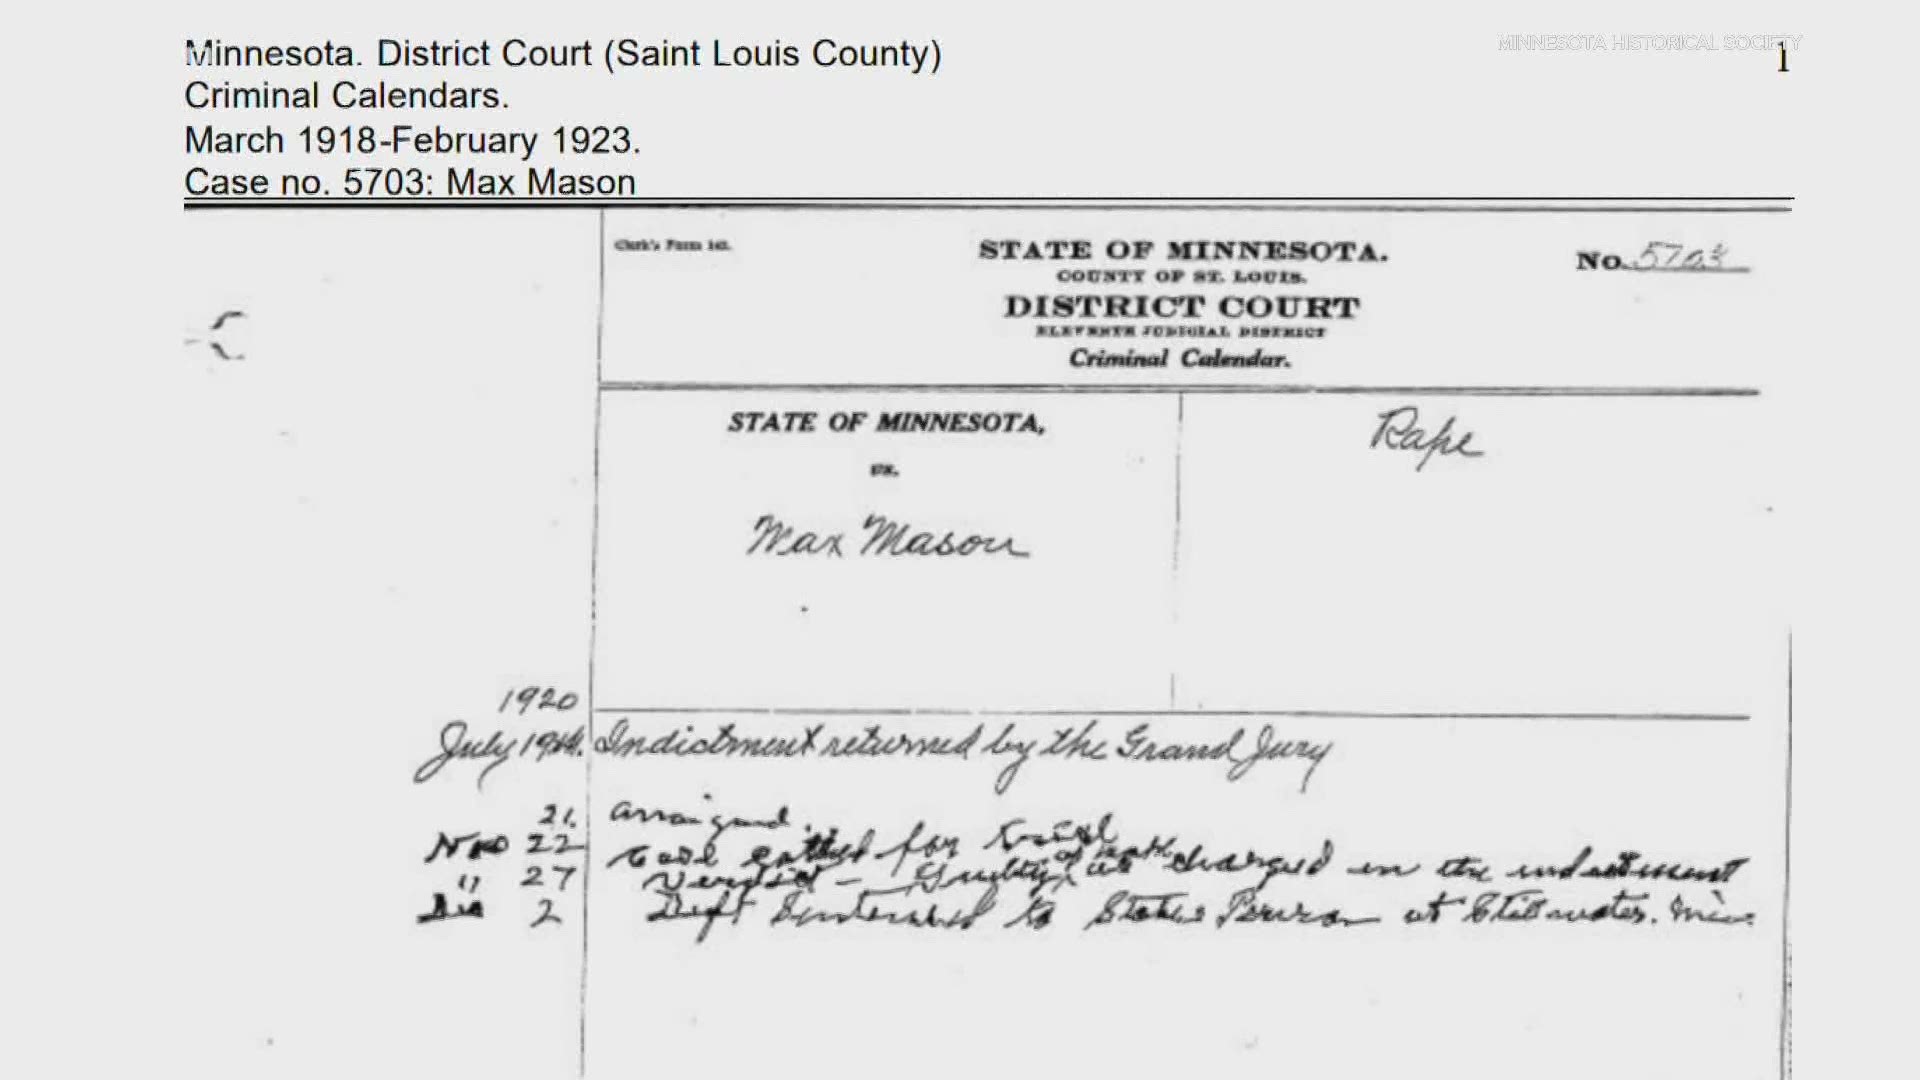 Mason was one of several black men, accused and arrested for something he did not do back in Duluth in the 1920’s.